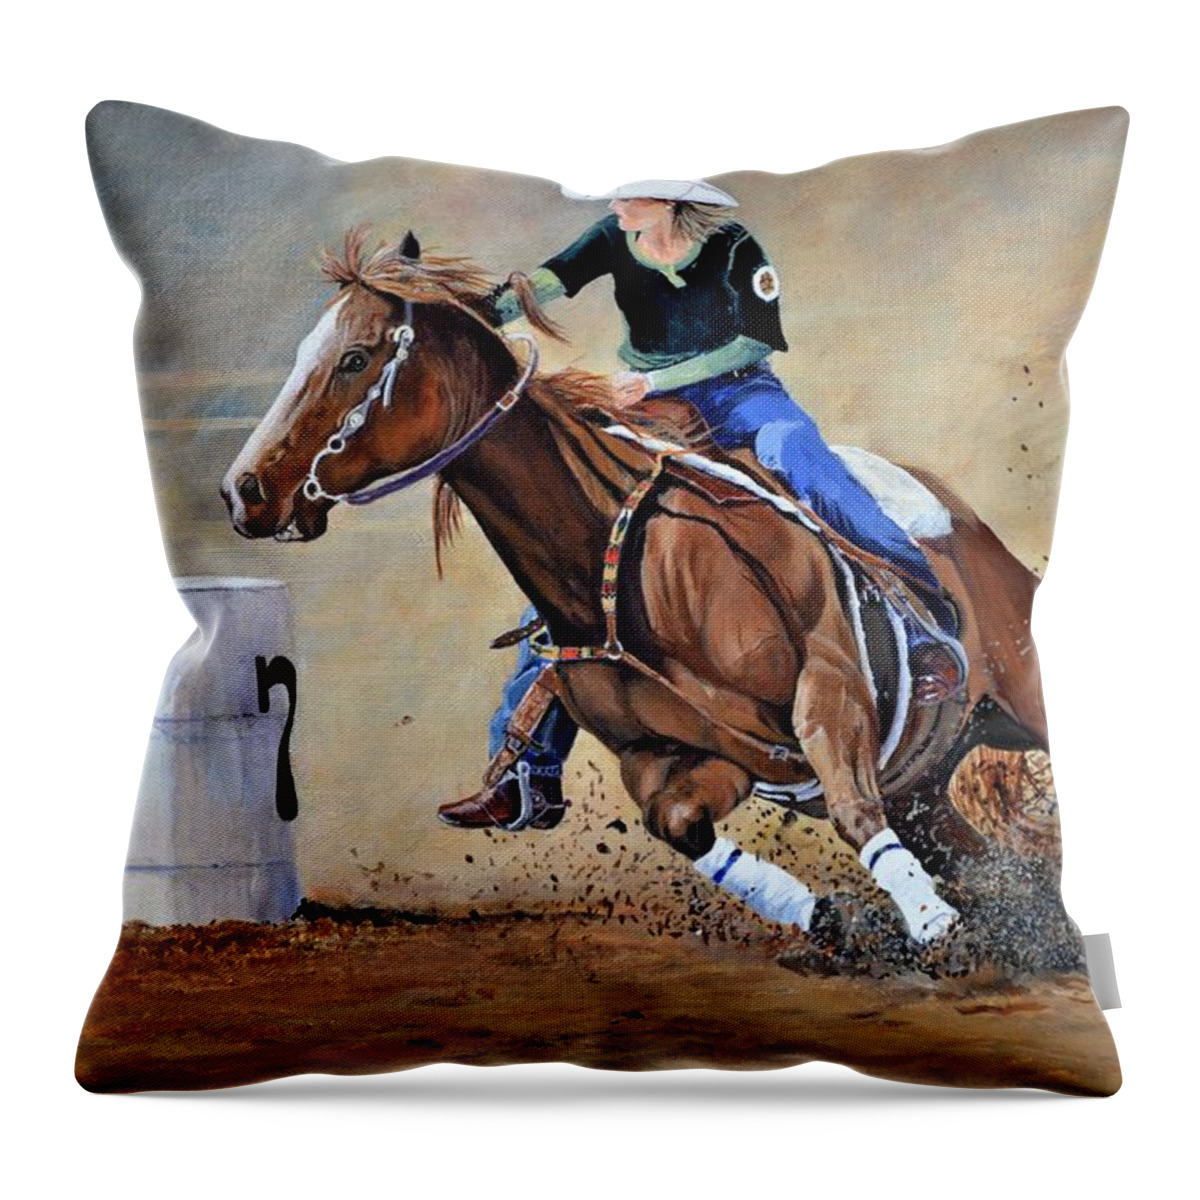 Rodeo Throw Pillow featuring the painting Barrel Racer by Barry BLAKE